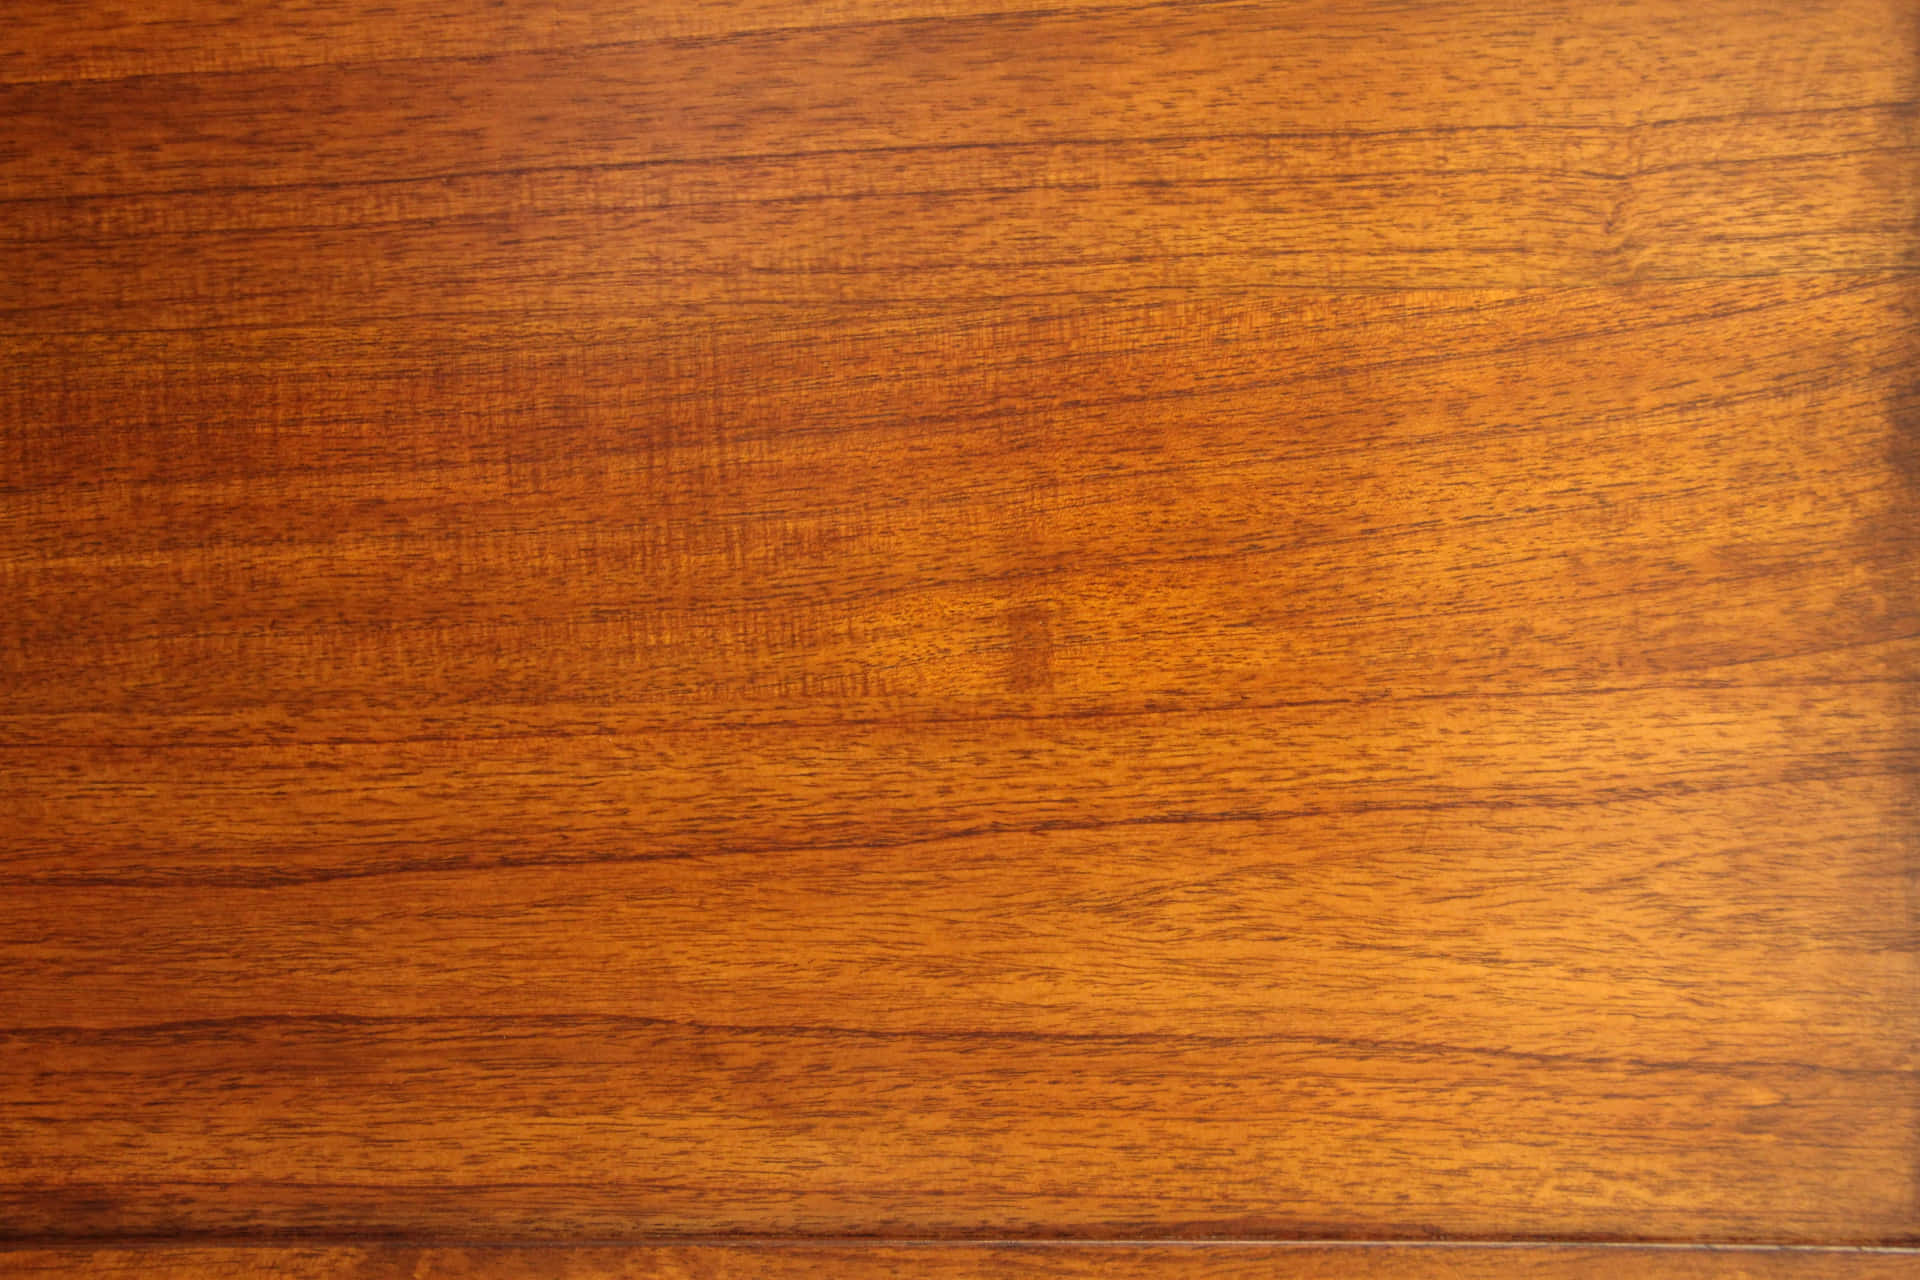 A Close Up Of A Wooden Table